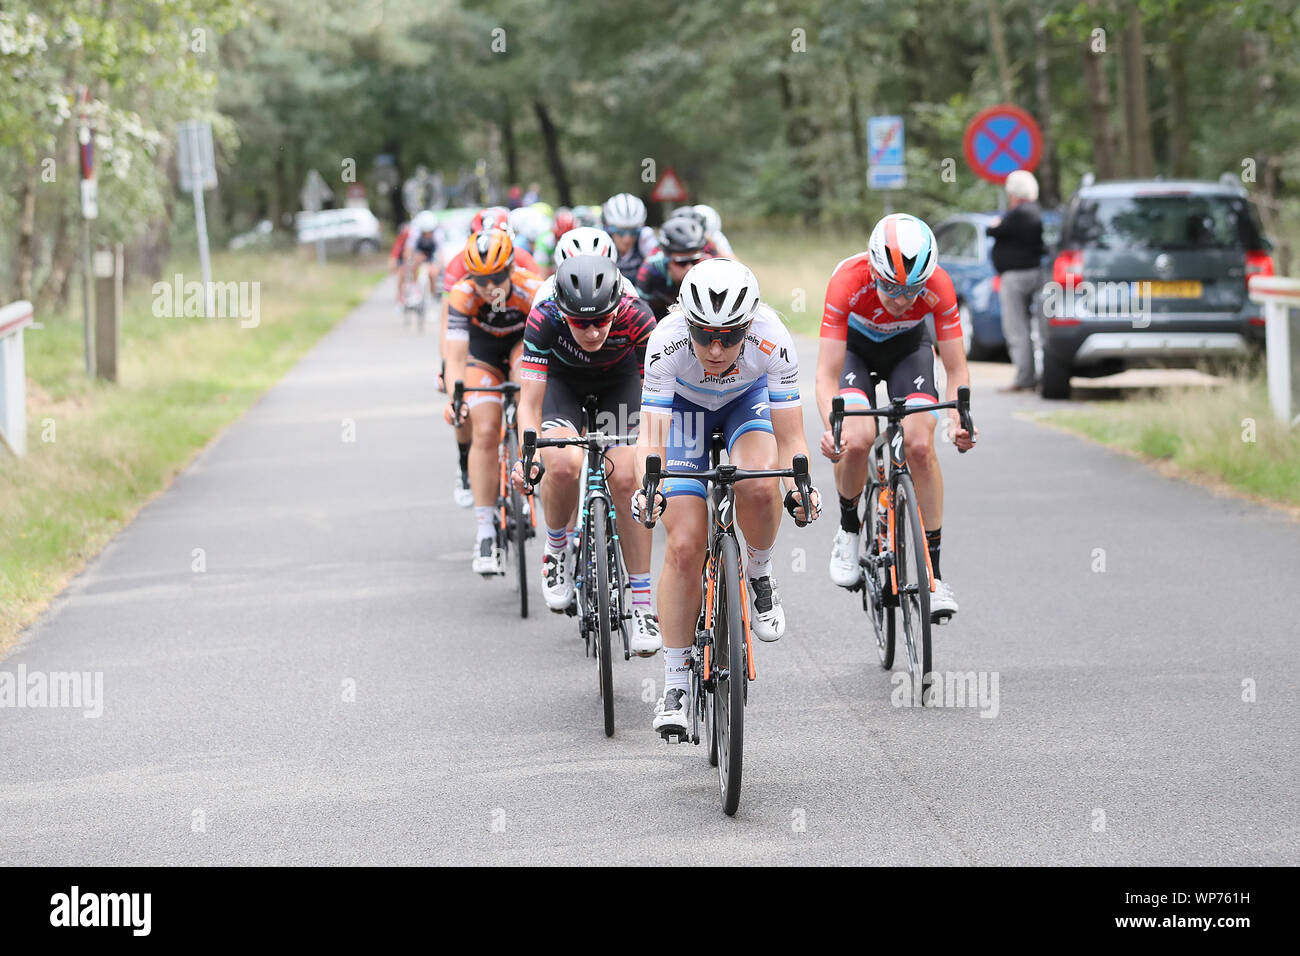 NIJVERDAL - 06-09-2019, cycling, Boels Ladies Tour, etappe 3, the peloton with Amy Pieters in the lead Stock Photo